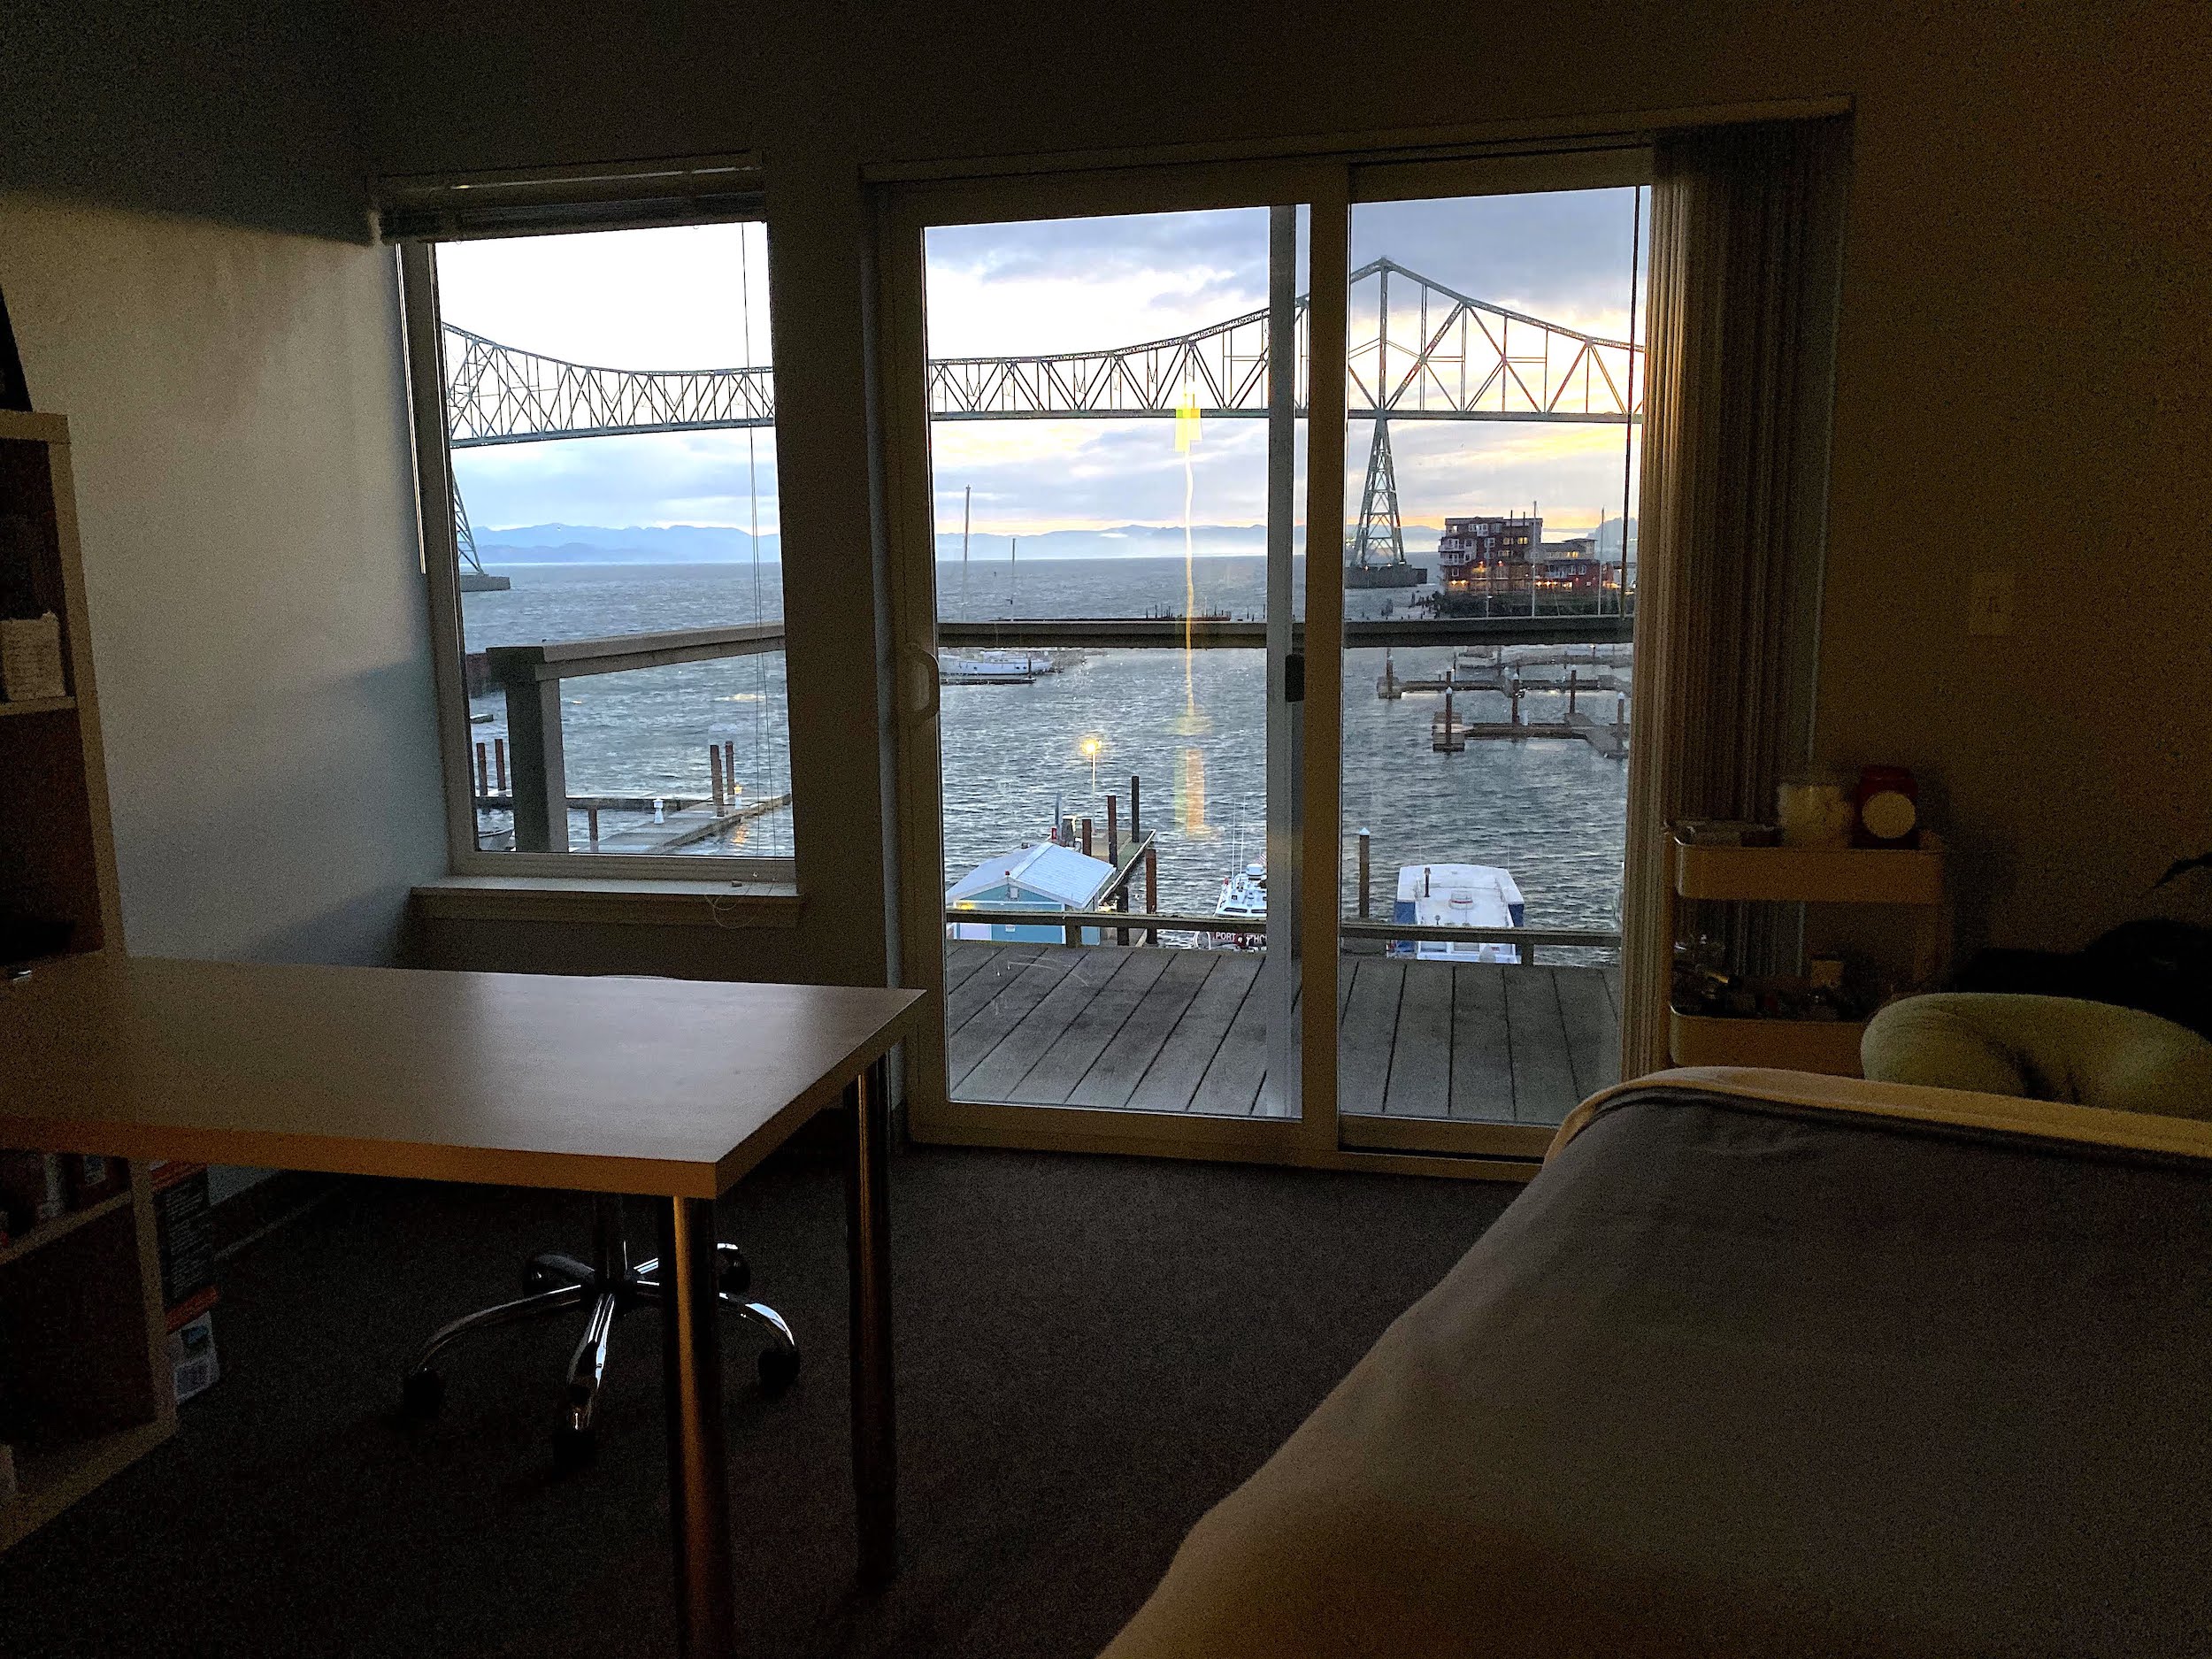 a darkened serene treatment room looking out over marina and bridge